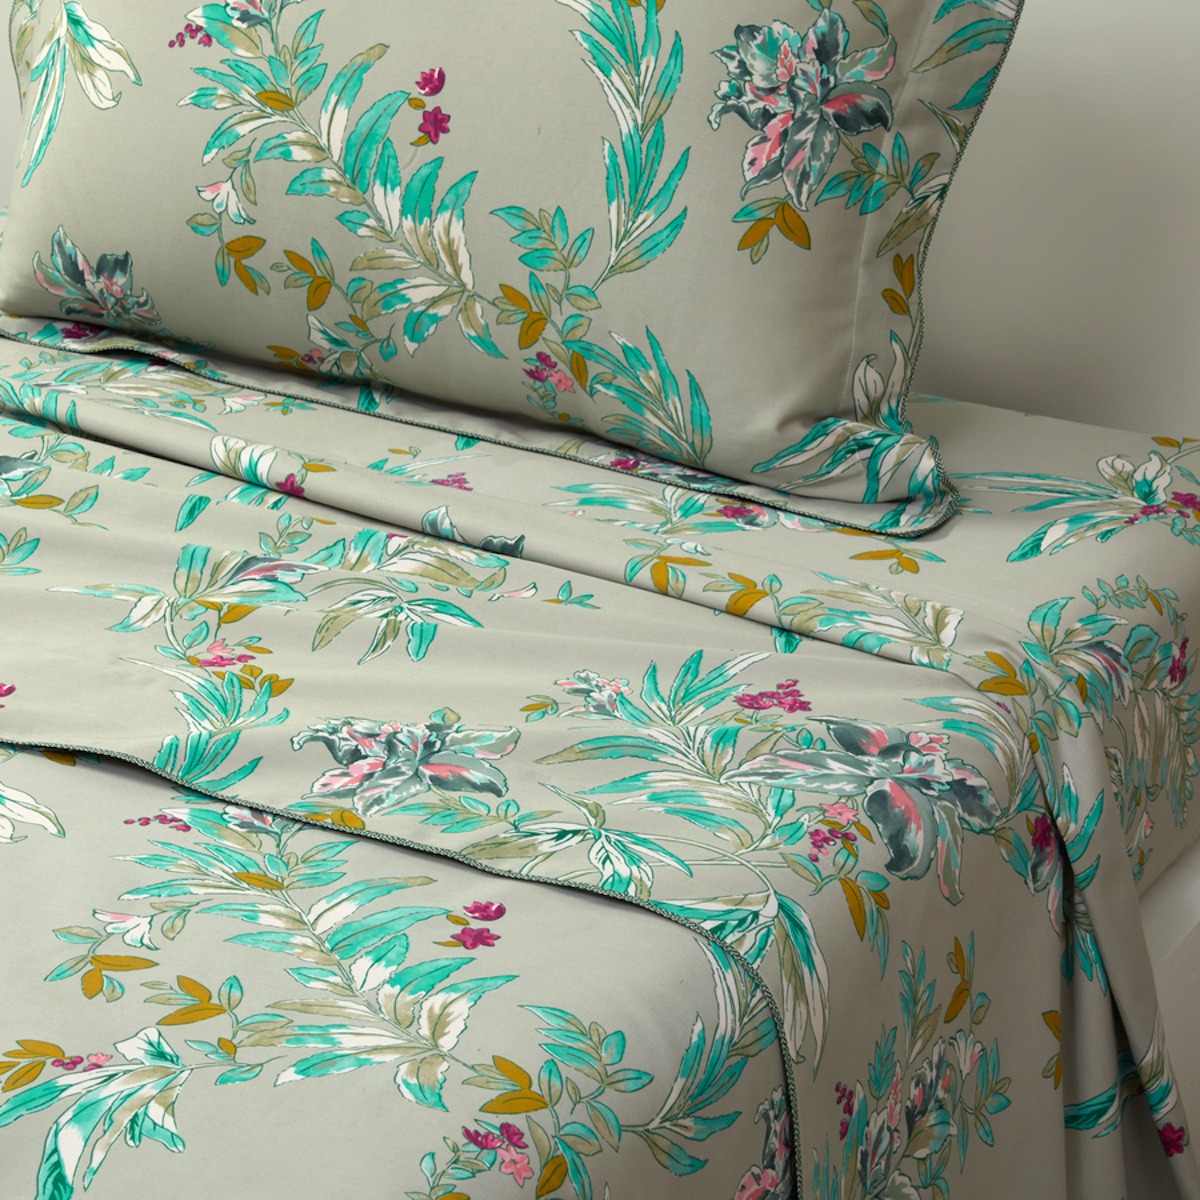 Image of a bed corner made with a dark grey green with a turquoise and white floral print set of sheets